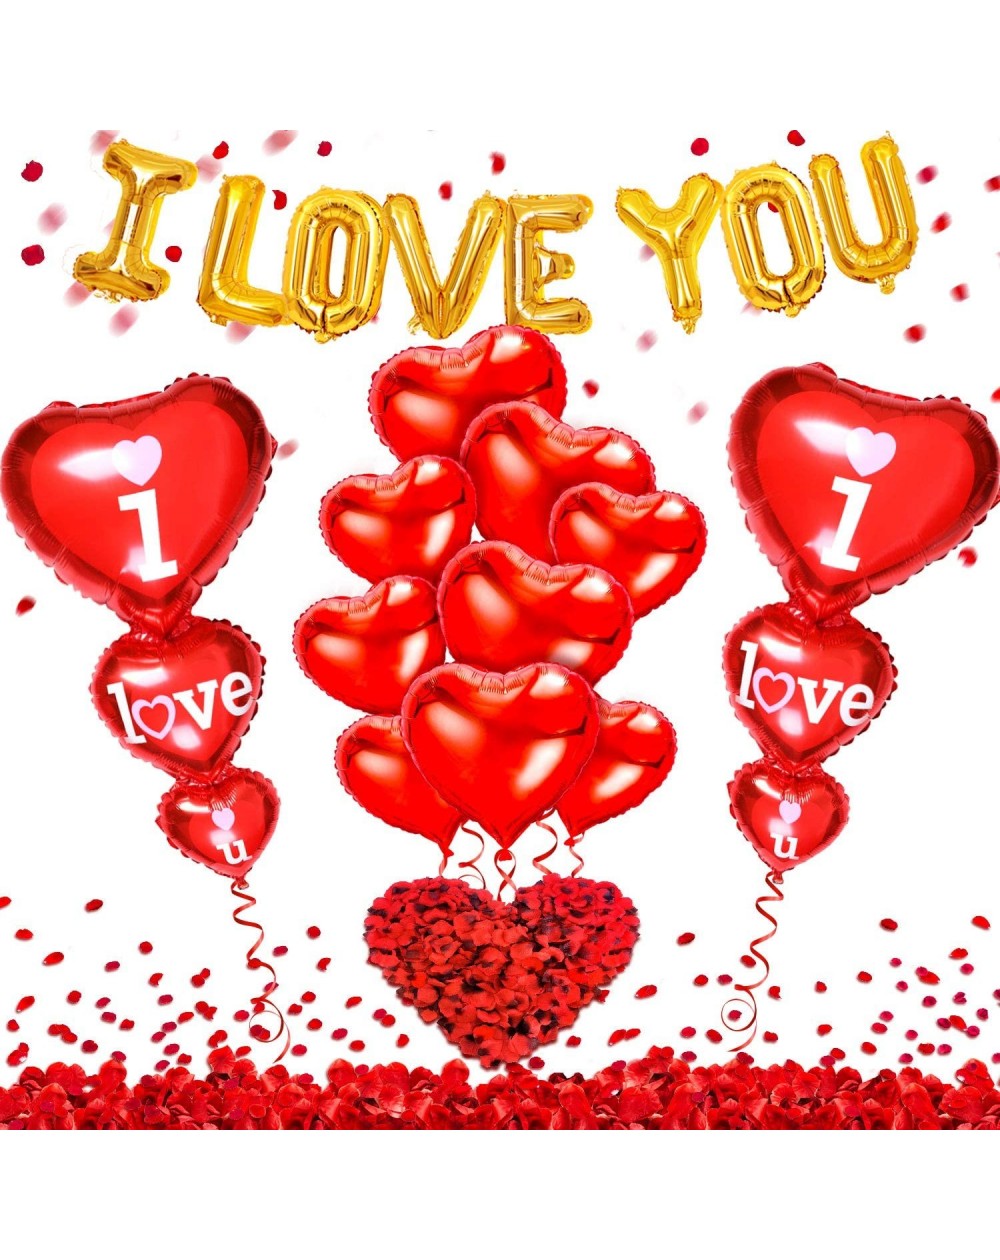 Balloons Valentines Day Party Decorations Kit - 18Pcs Foil Mylar Red Heart Shaped Balloons - 8Pcs Gold I Love You Balloons & ...